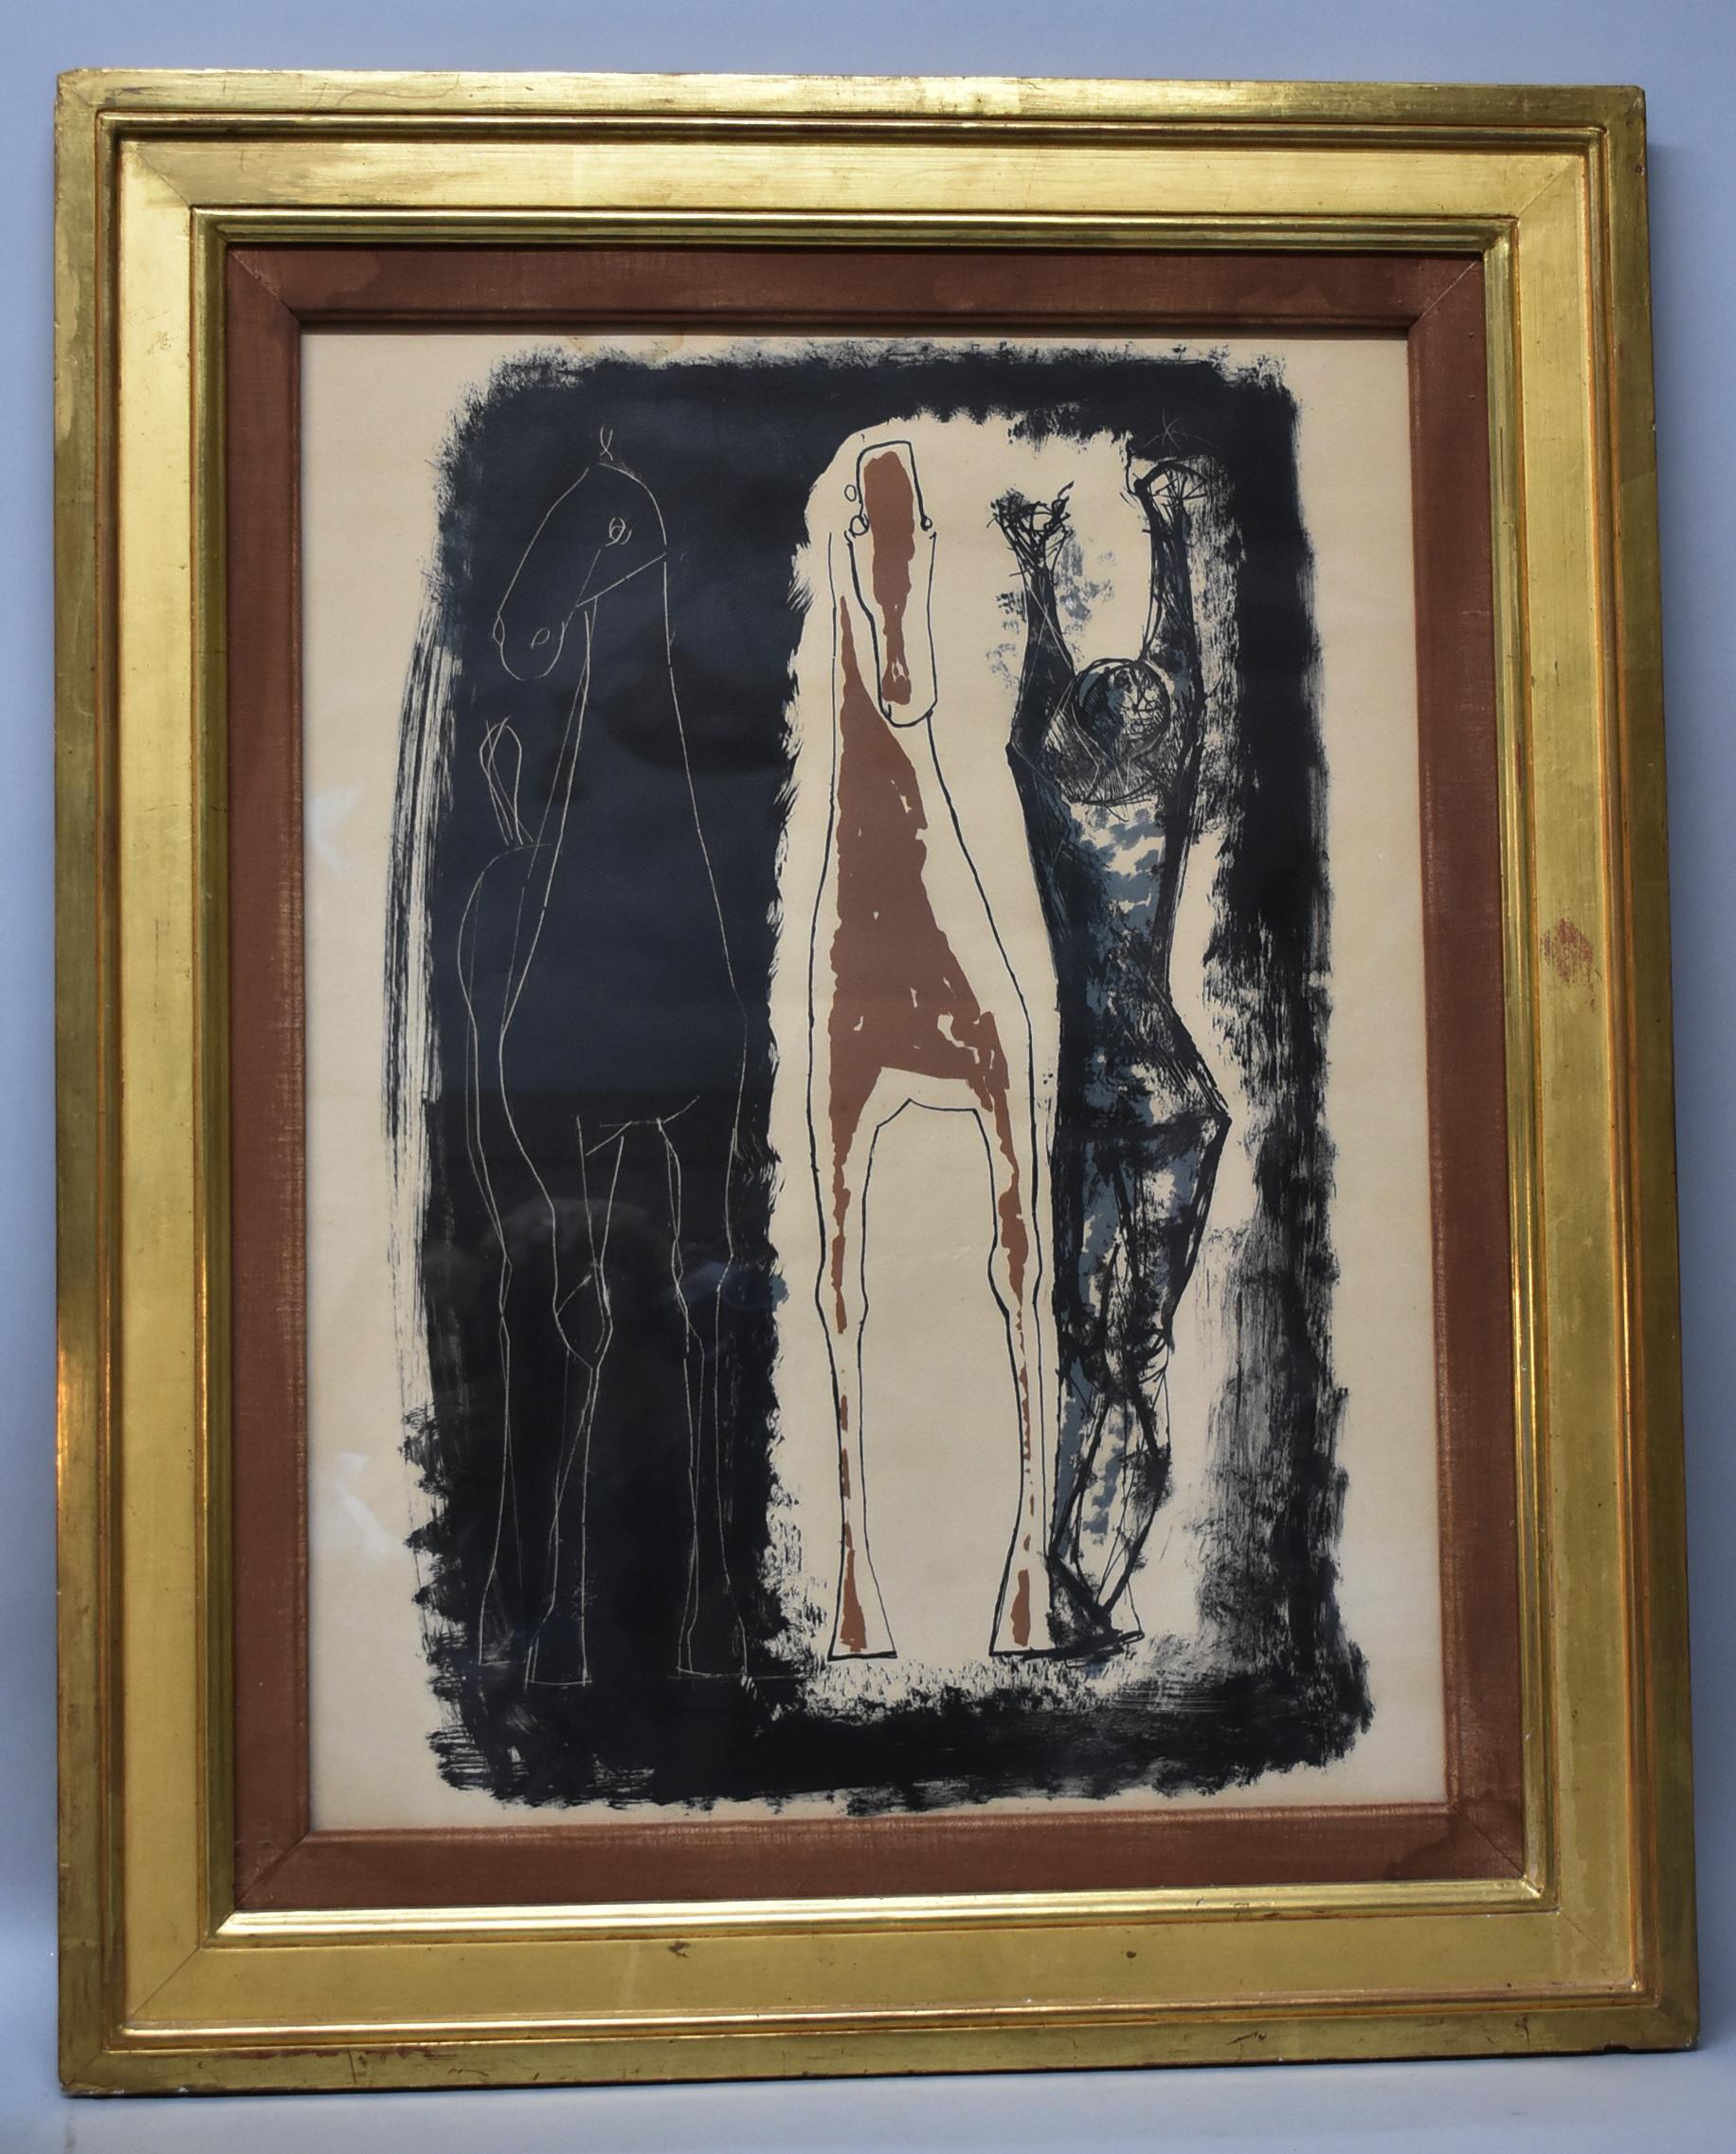 Horse and man lithograph by famed Italian artist Marino Marini born 1901 in Pistoia, Italy, died 1980 in Tuscany. His art is represented at the Tate and the Peggy Guggenheim in Venice. 1950's open edition. Overall size 25 3/4